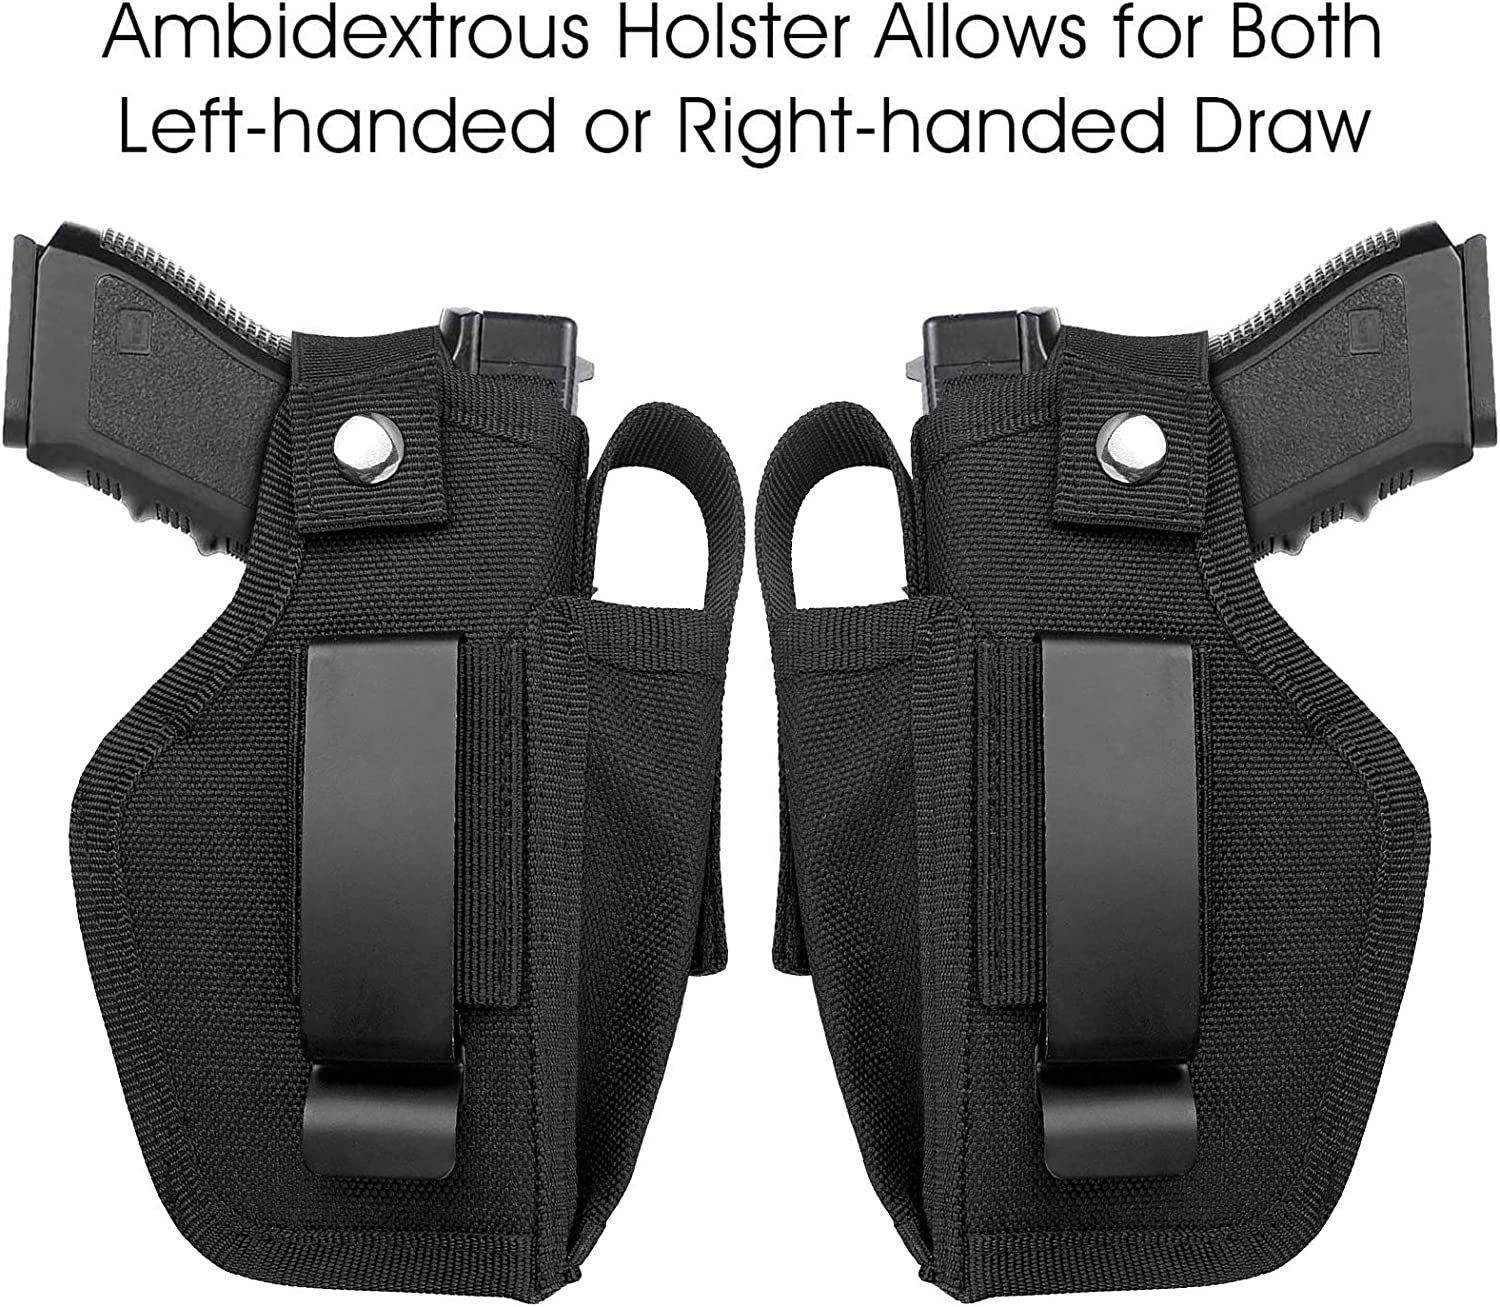 Universal Concealed Carry Gun Holster for Women and Men, Inside or Outside The Waistband with Magazine IWB Holsters Right and Left Hand Draw Fits Subcompact Compact Full Size Pistols